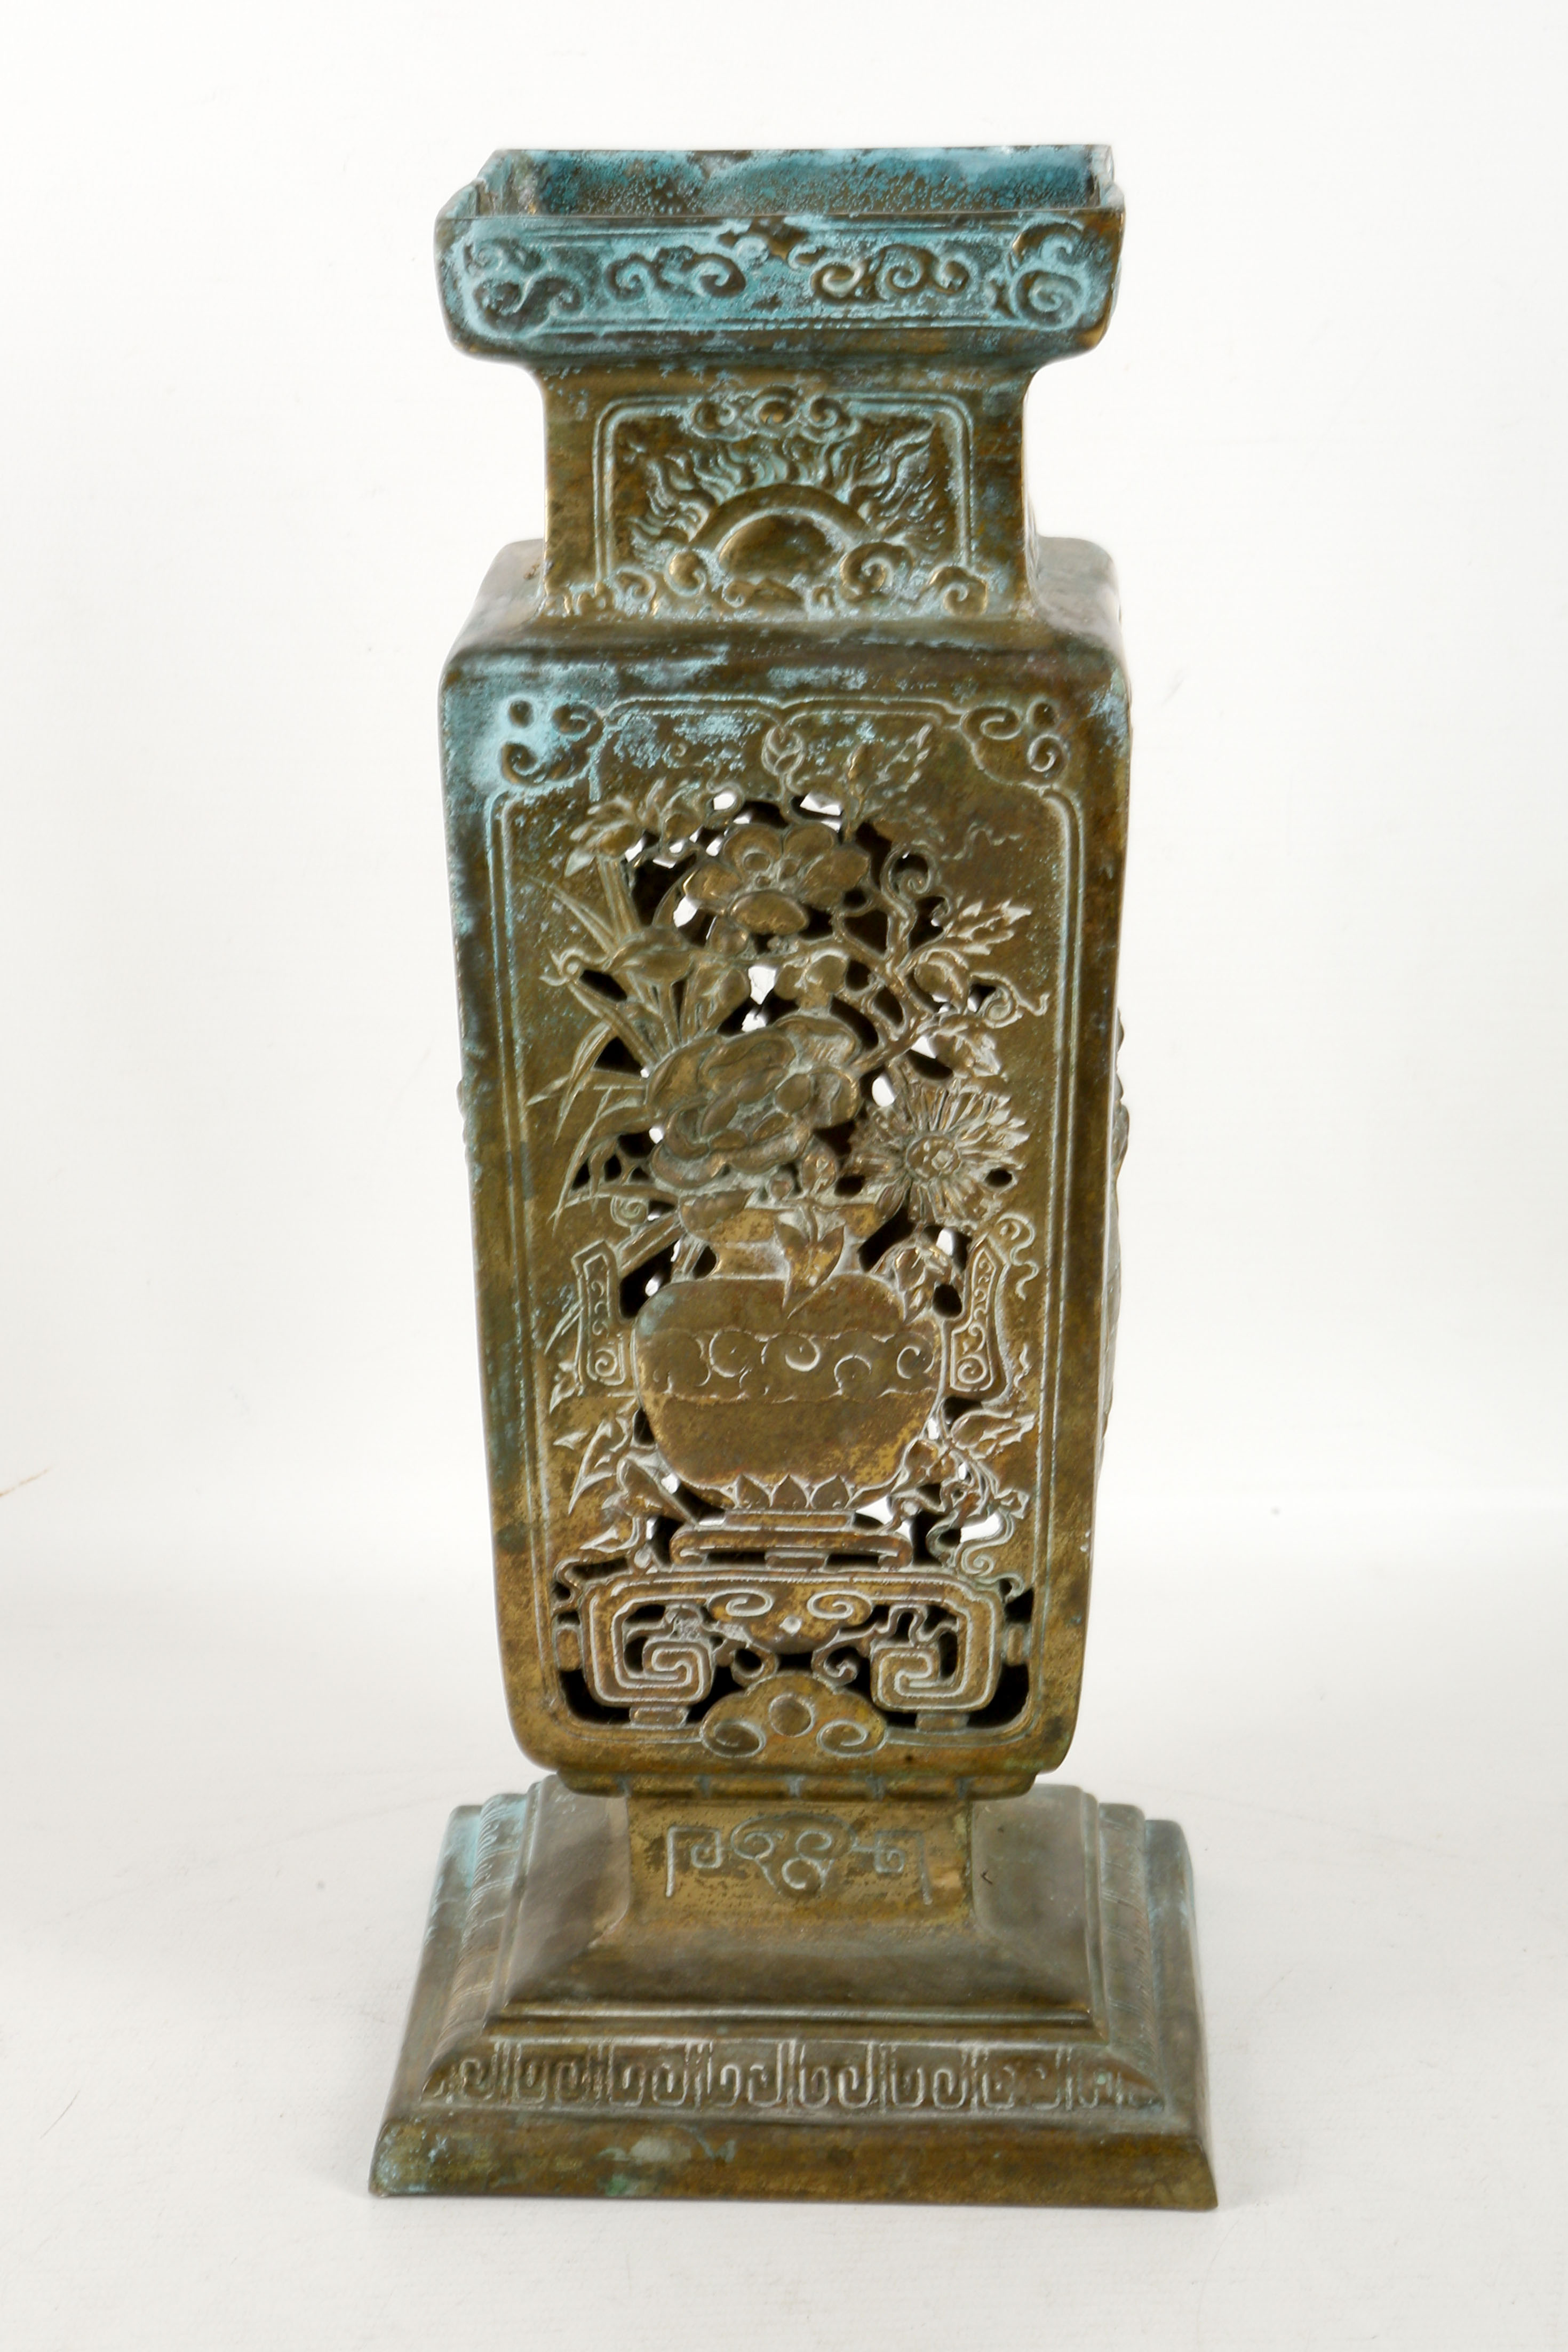 A Chinese copper alloy square section reticulated lantern, the sides decorated with vases filled - Image 2 of 4